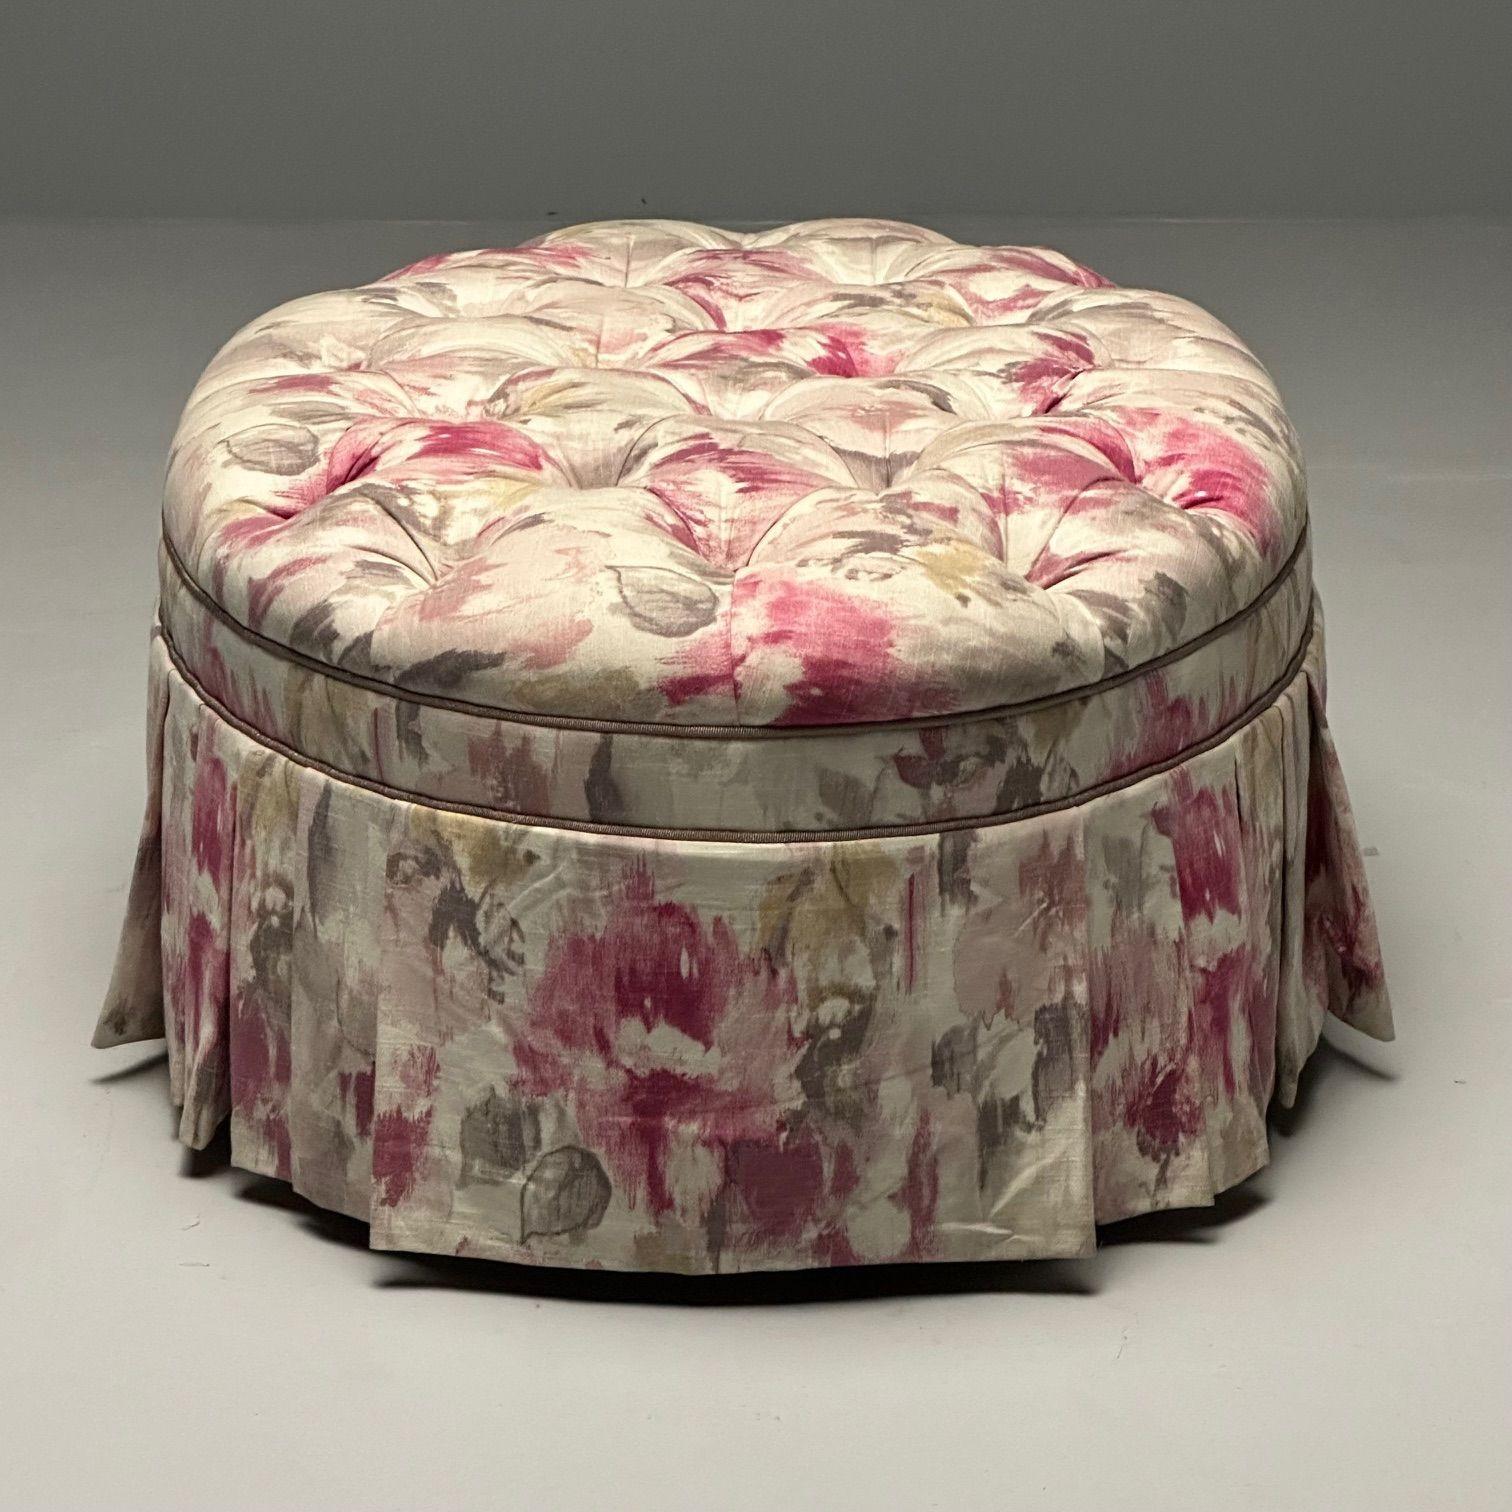 Traditional, Oval Tufted Ottoman or Pouf, Tie Dye Floral Fabric, Wood, USA 2010s For Sale 1